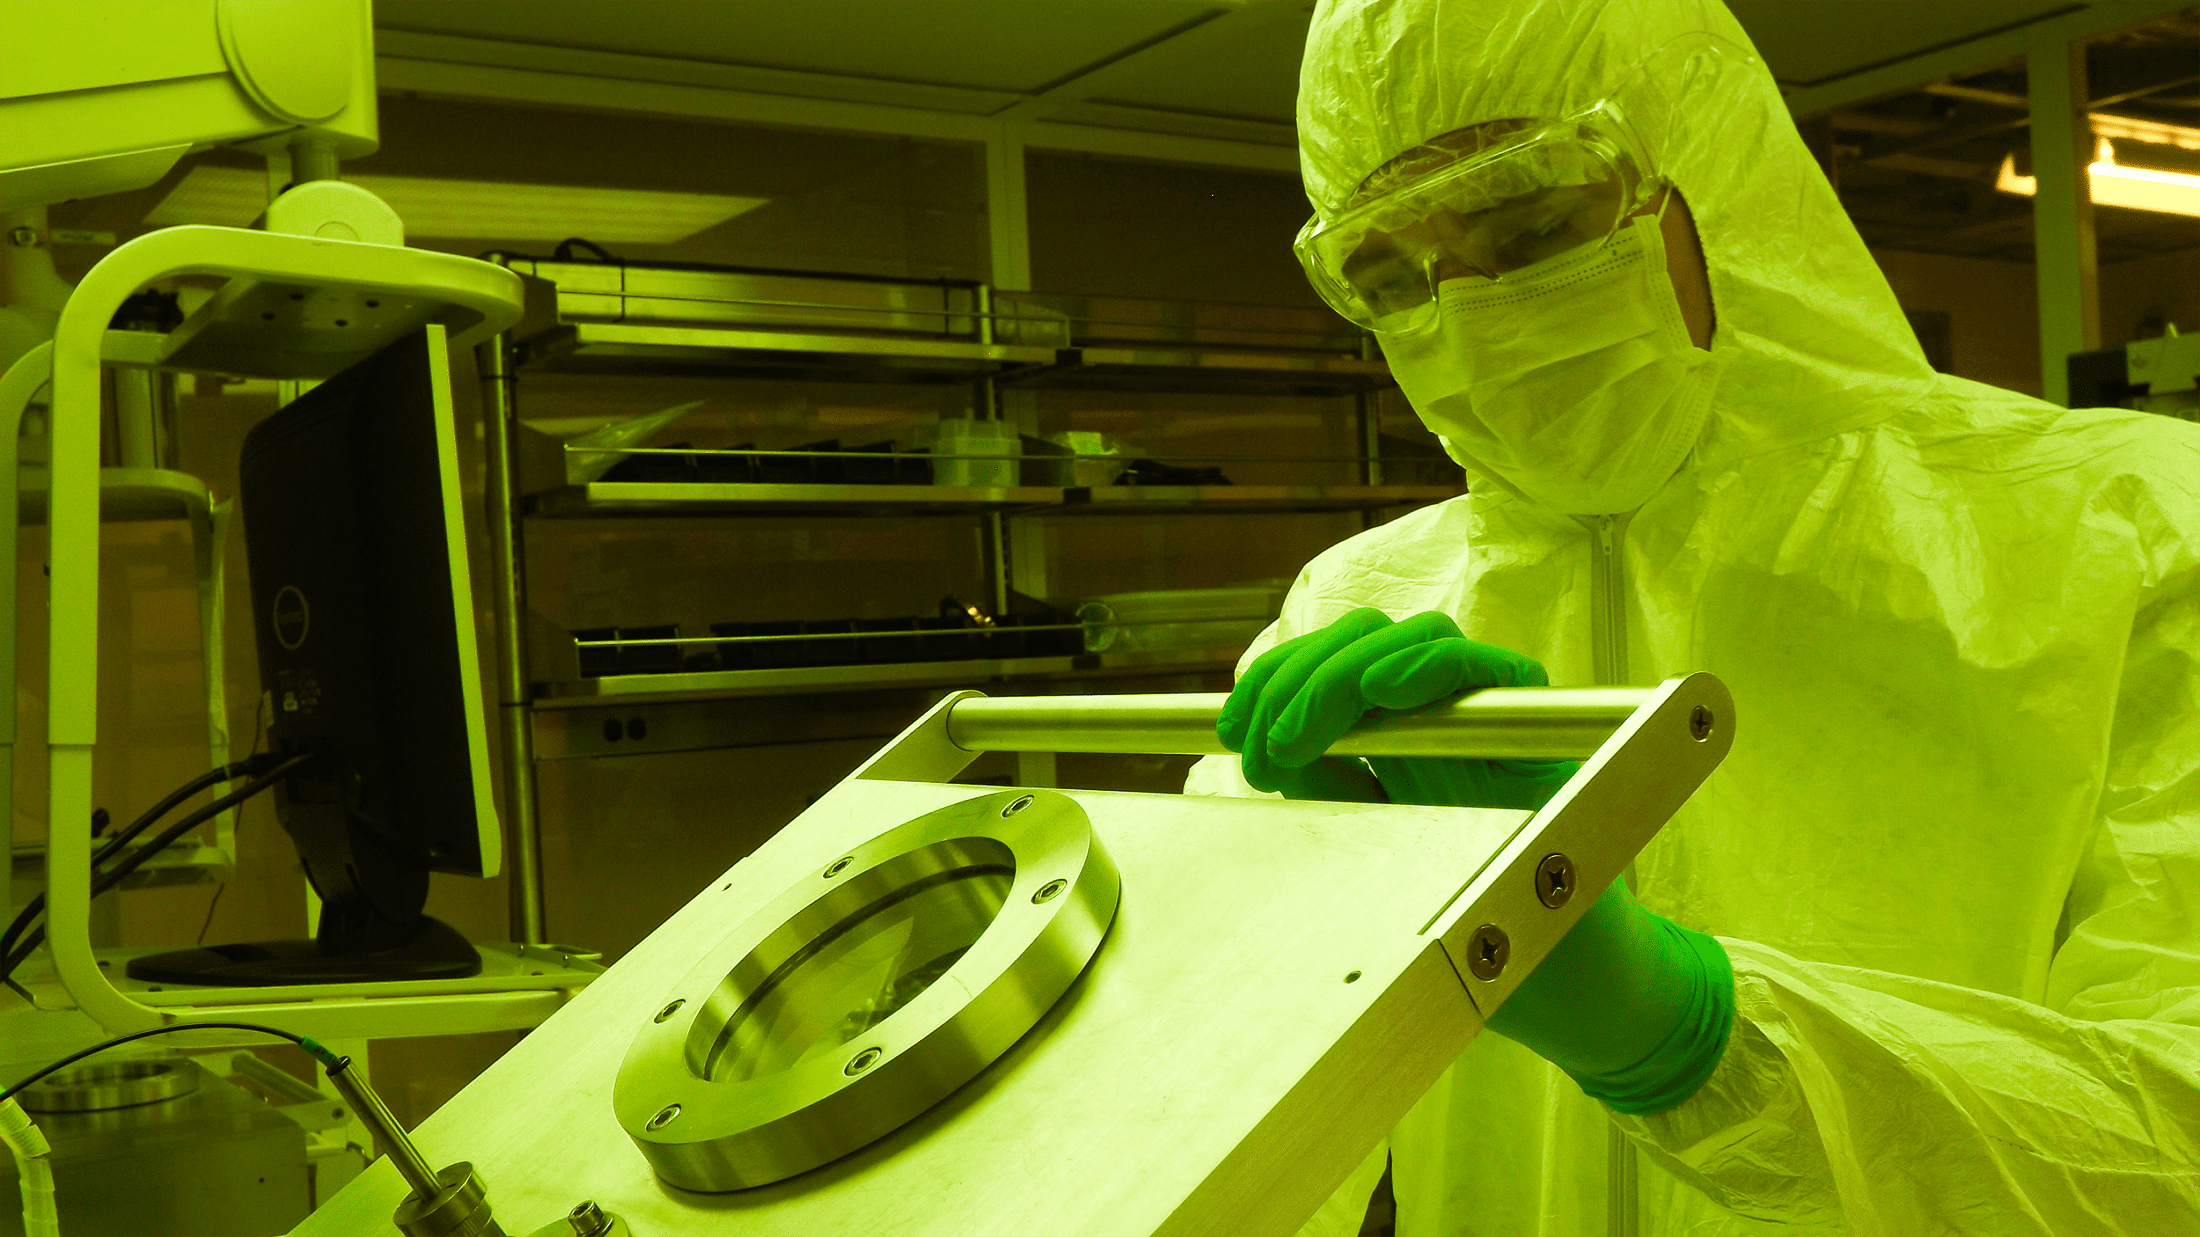 A student wearing protective clothing from head to toe works in the clean room at the Institute for Advanced Materials and Manufacturing.